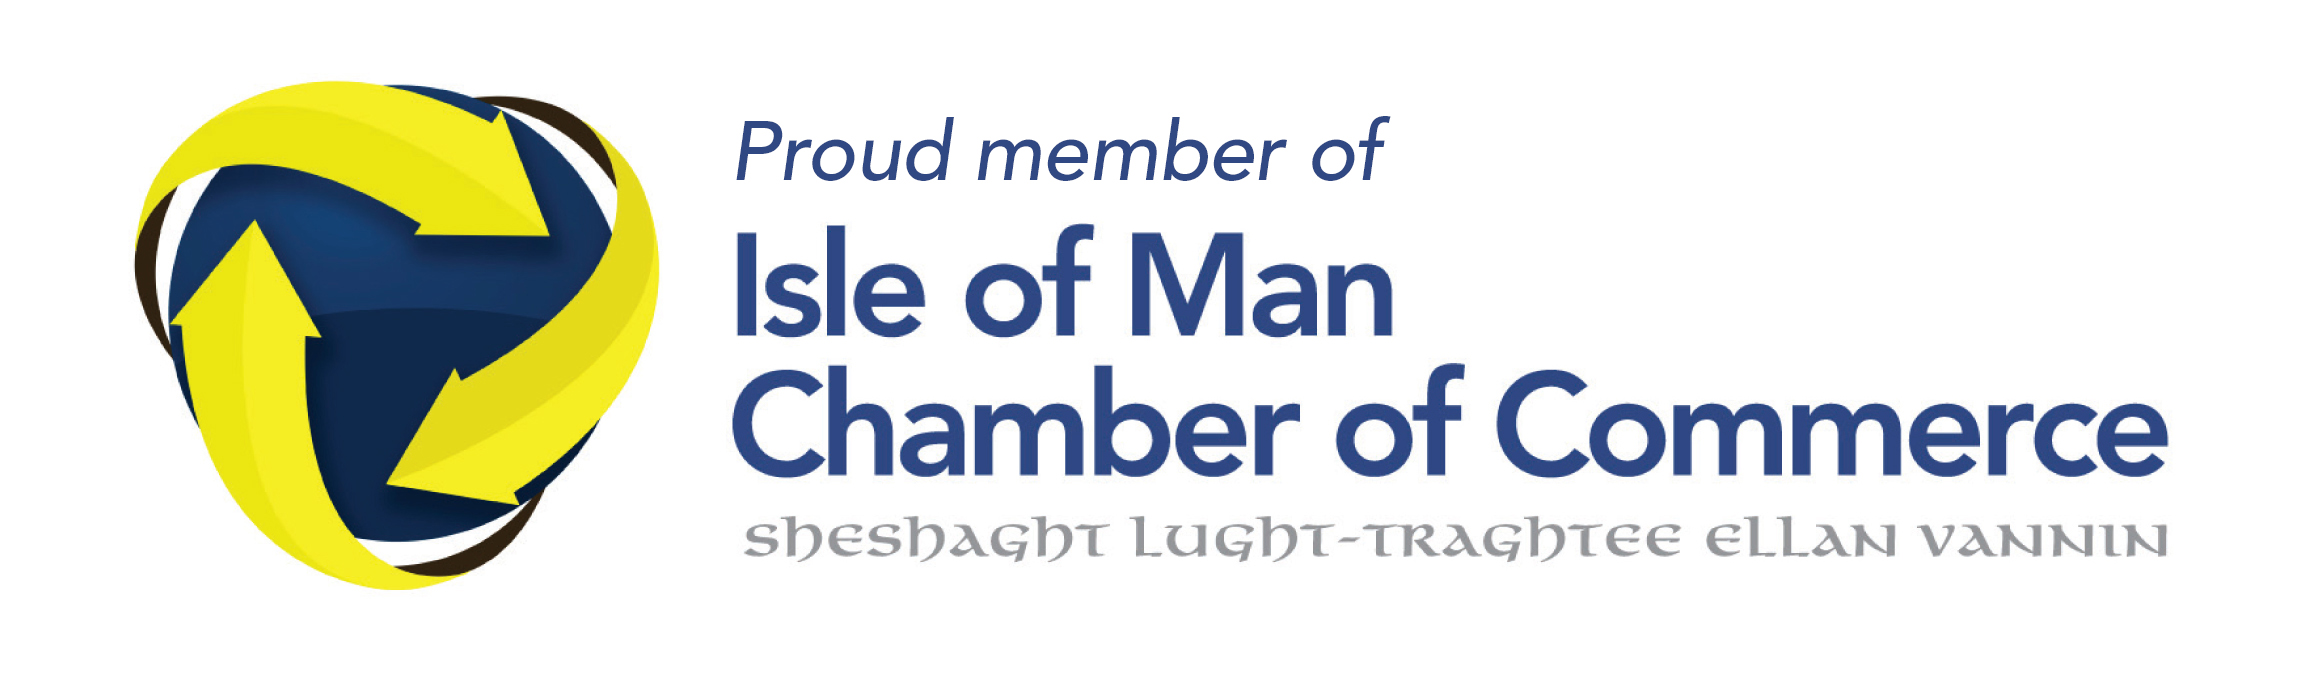 Link to chamber of commerce website